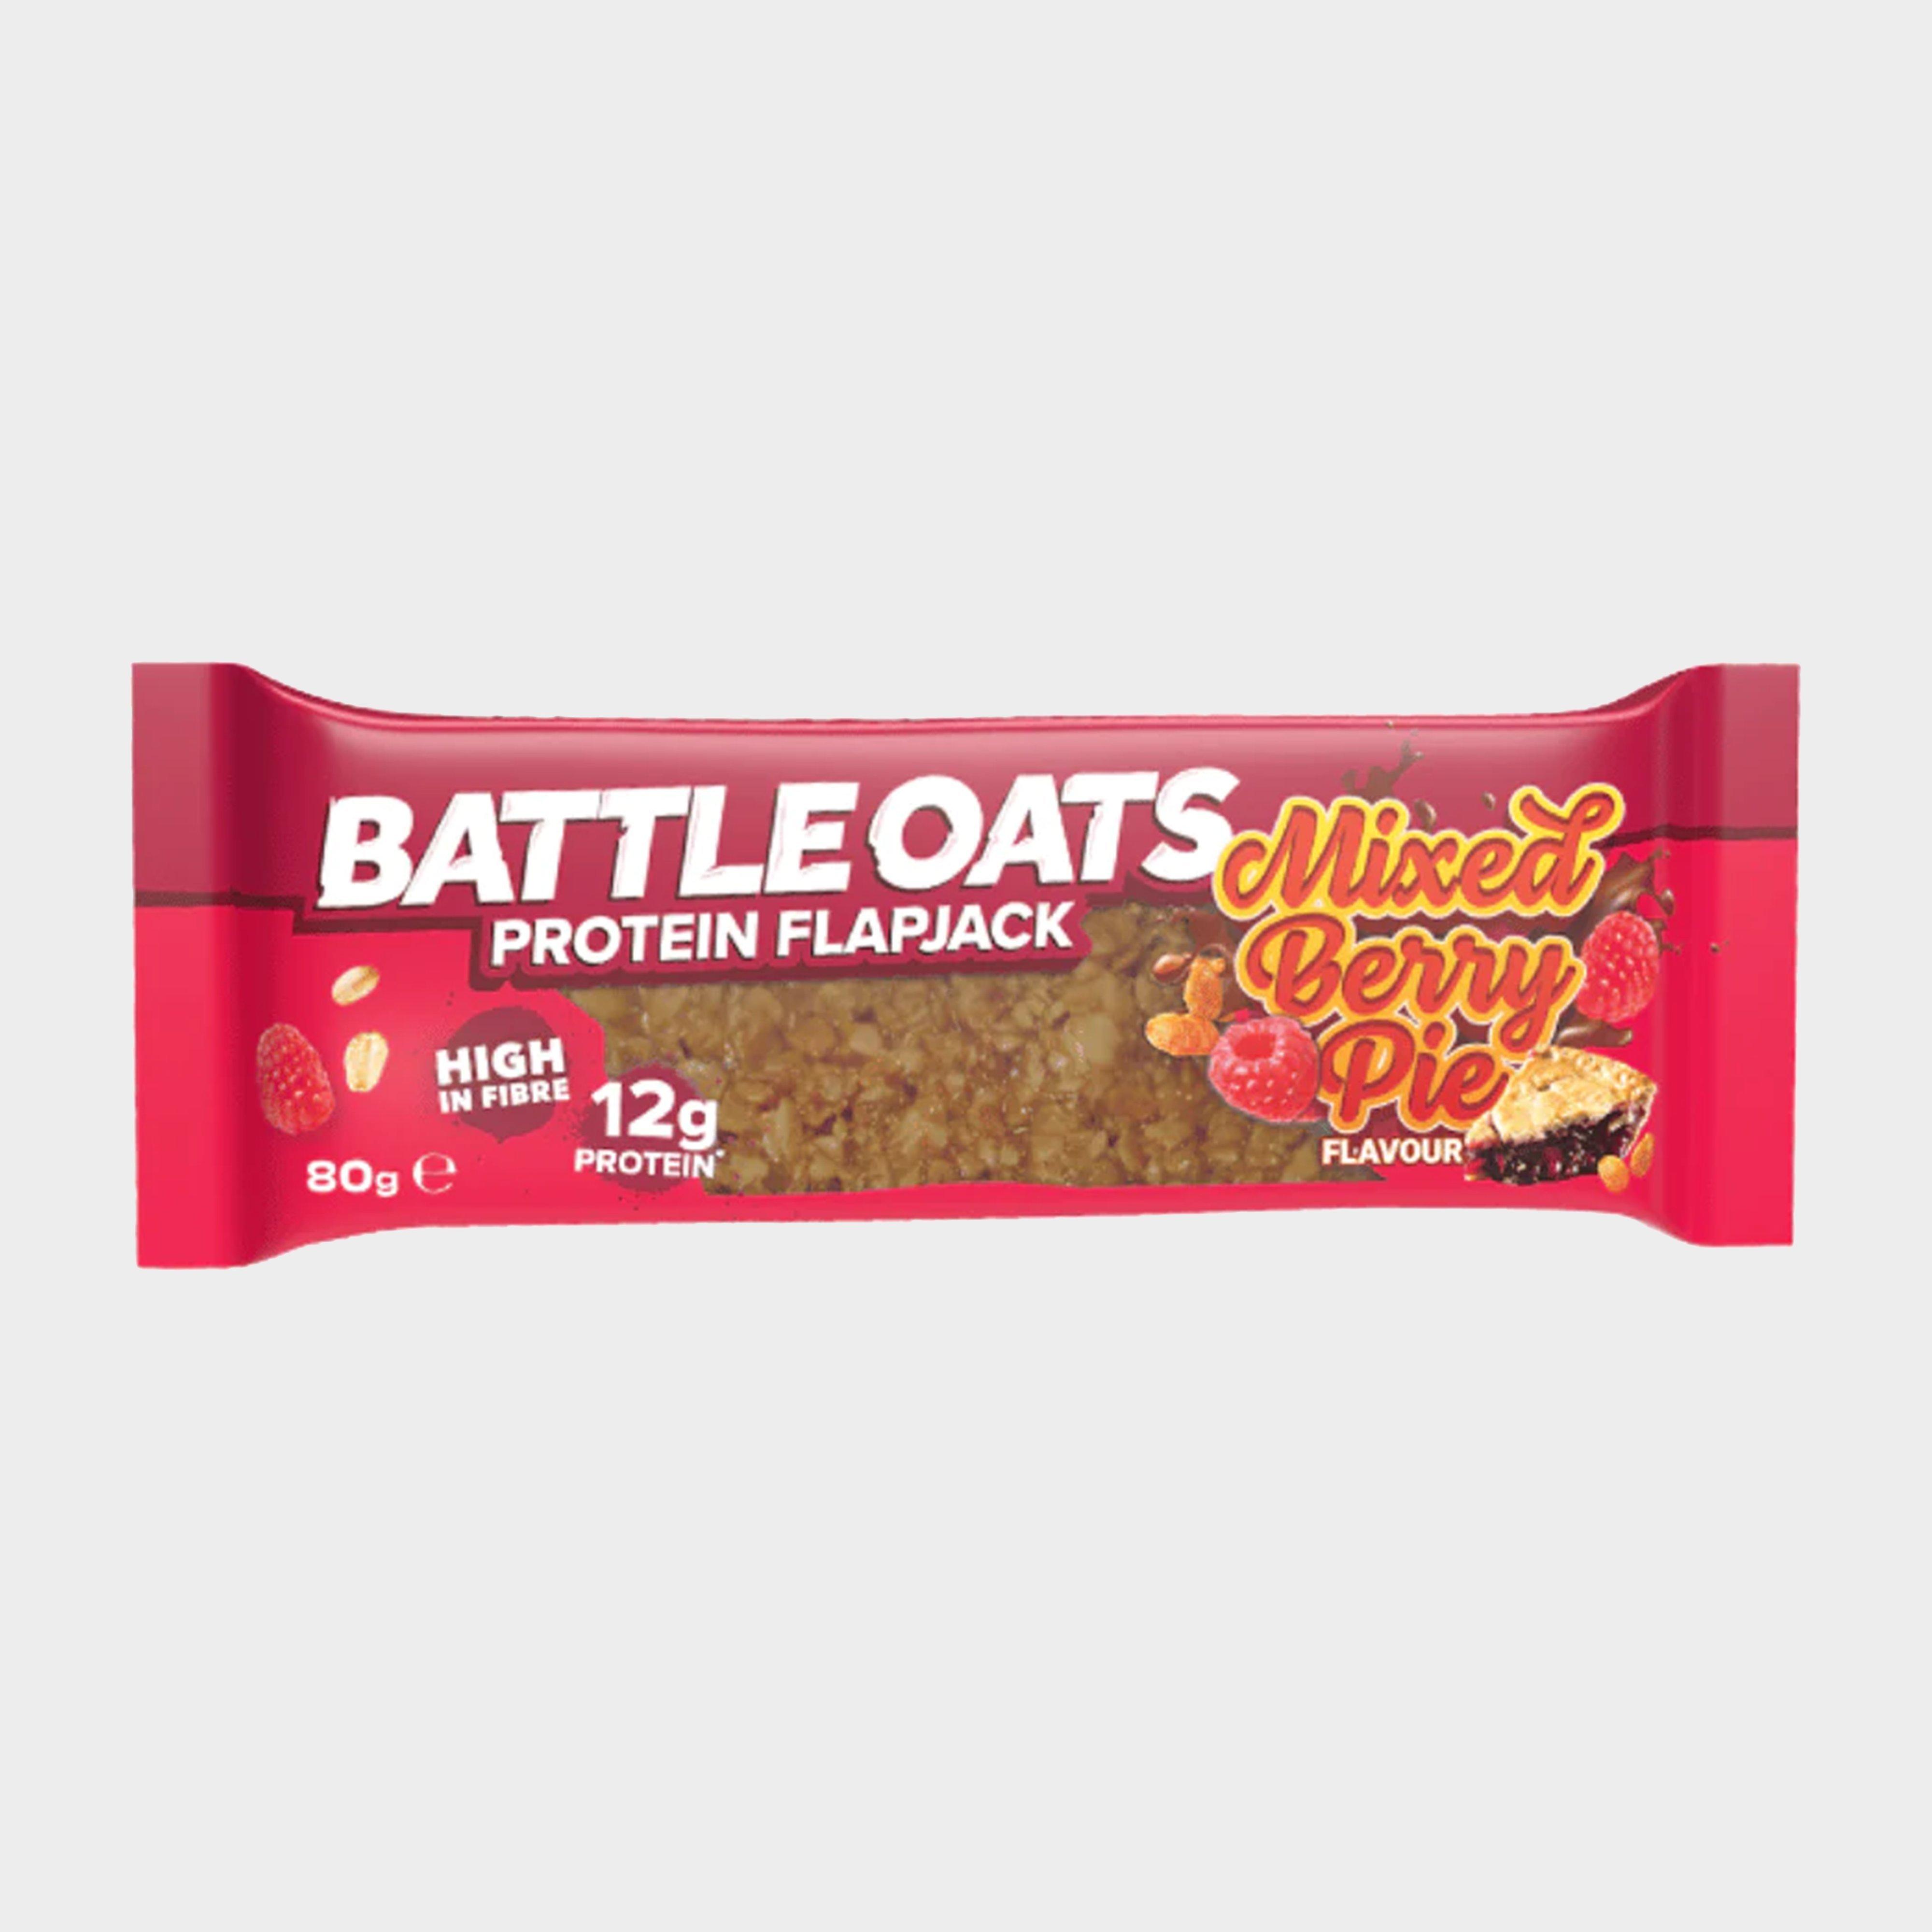 Photos - Protein BlackBerry Battle Oats  Flapjack 70g , Red (Mixed Berry Pie)